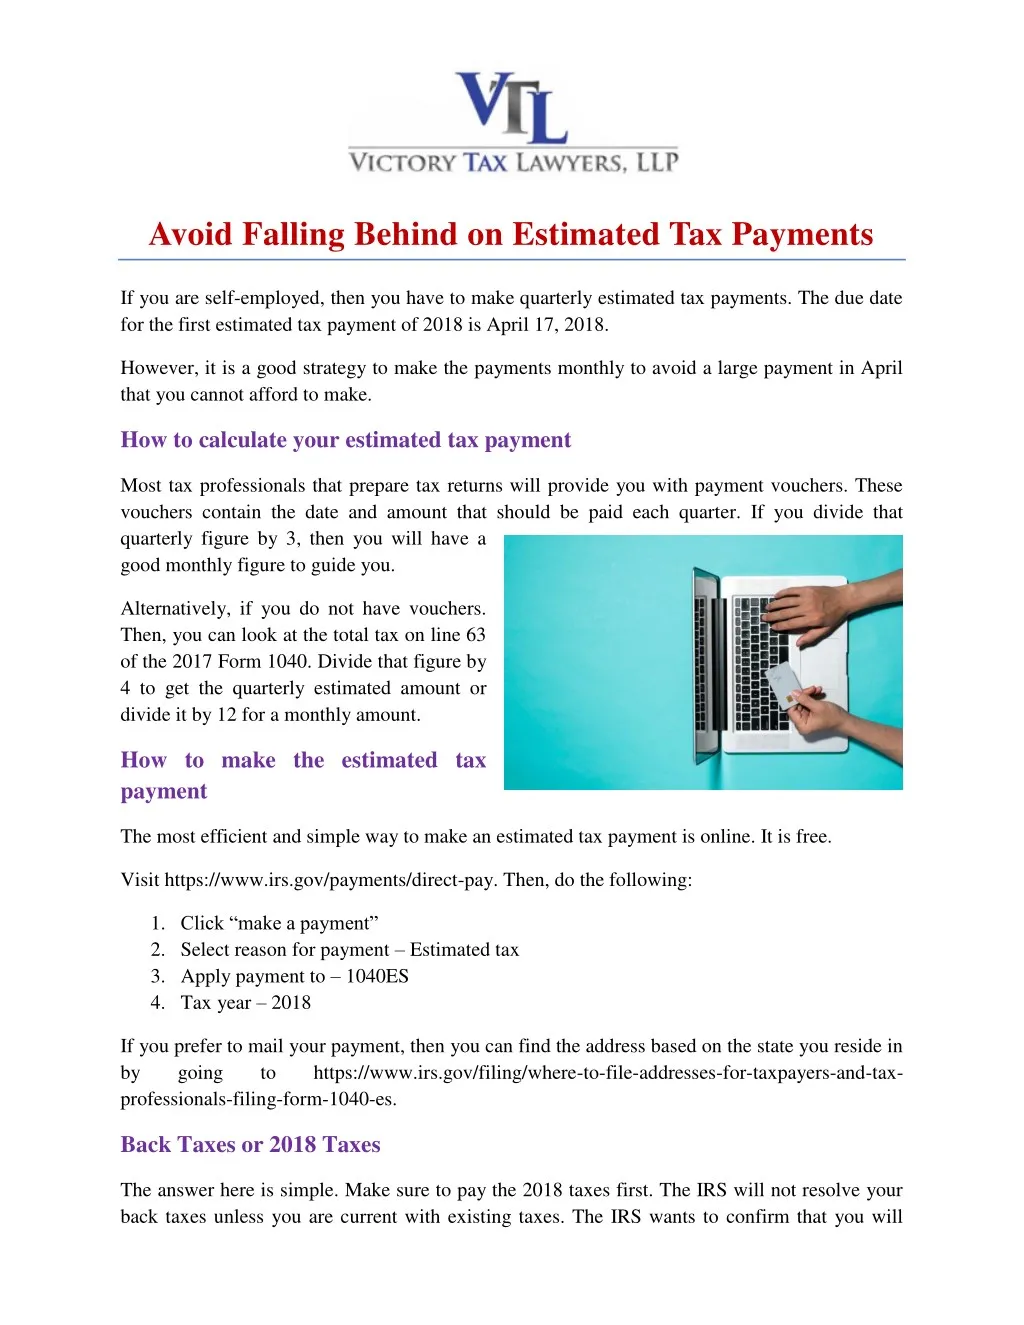 avoid falling behind on estimated tax payments